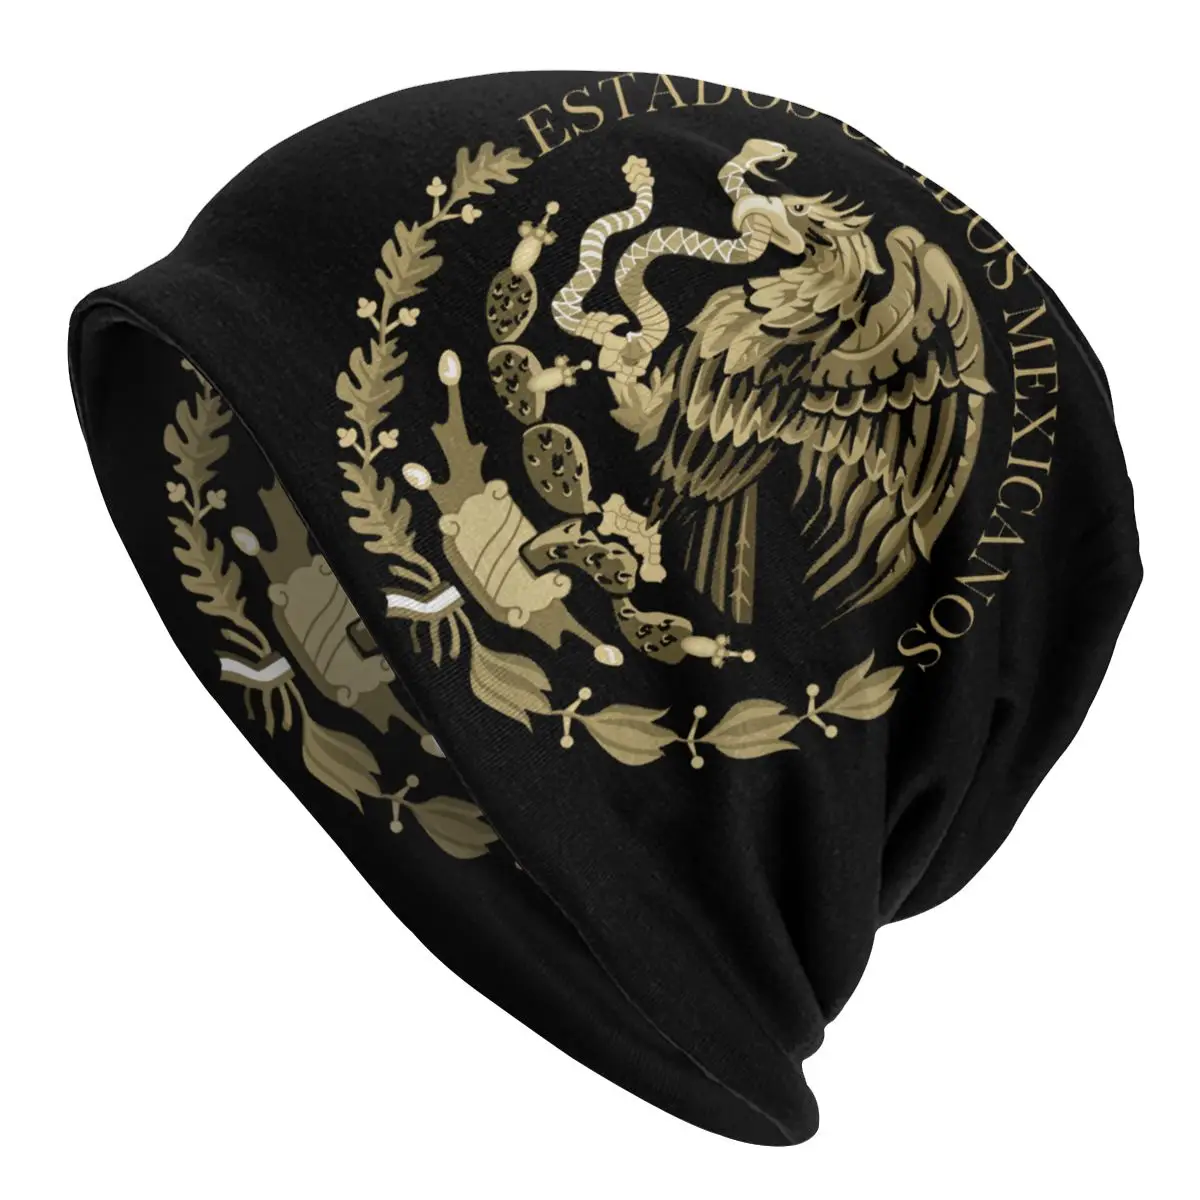 

Cool Coat Of Arms Of Mexico Skullies Beanies Caps Winter Men Women Knit Hat Adult Unisex Mexican Flag Seal In Sepia Bonnet Hats